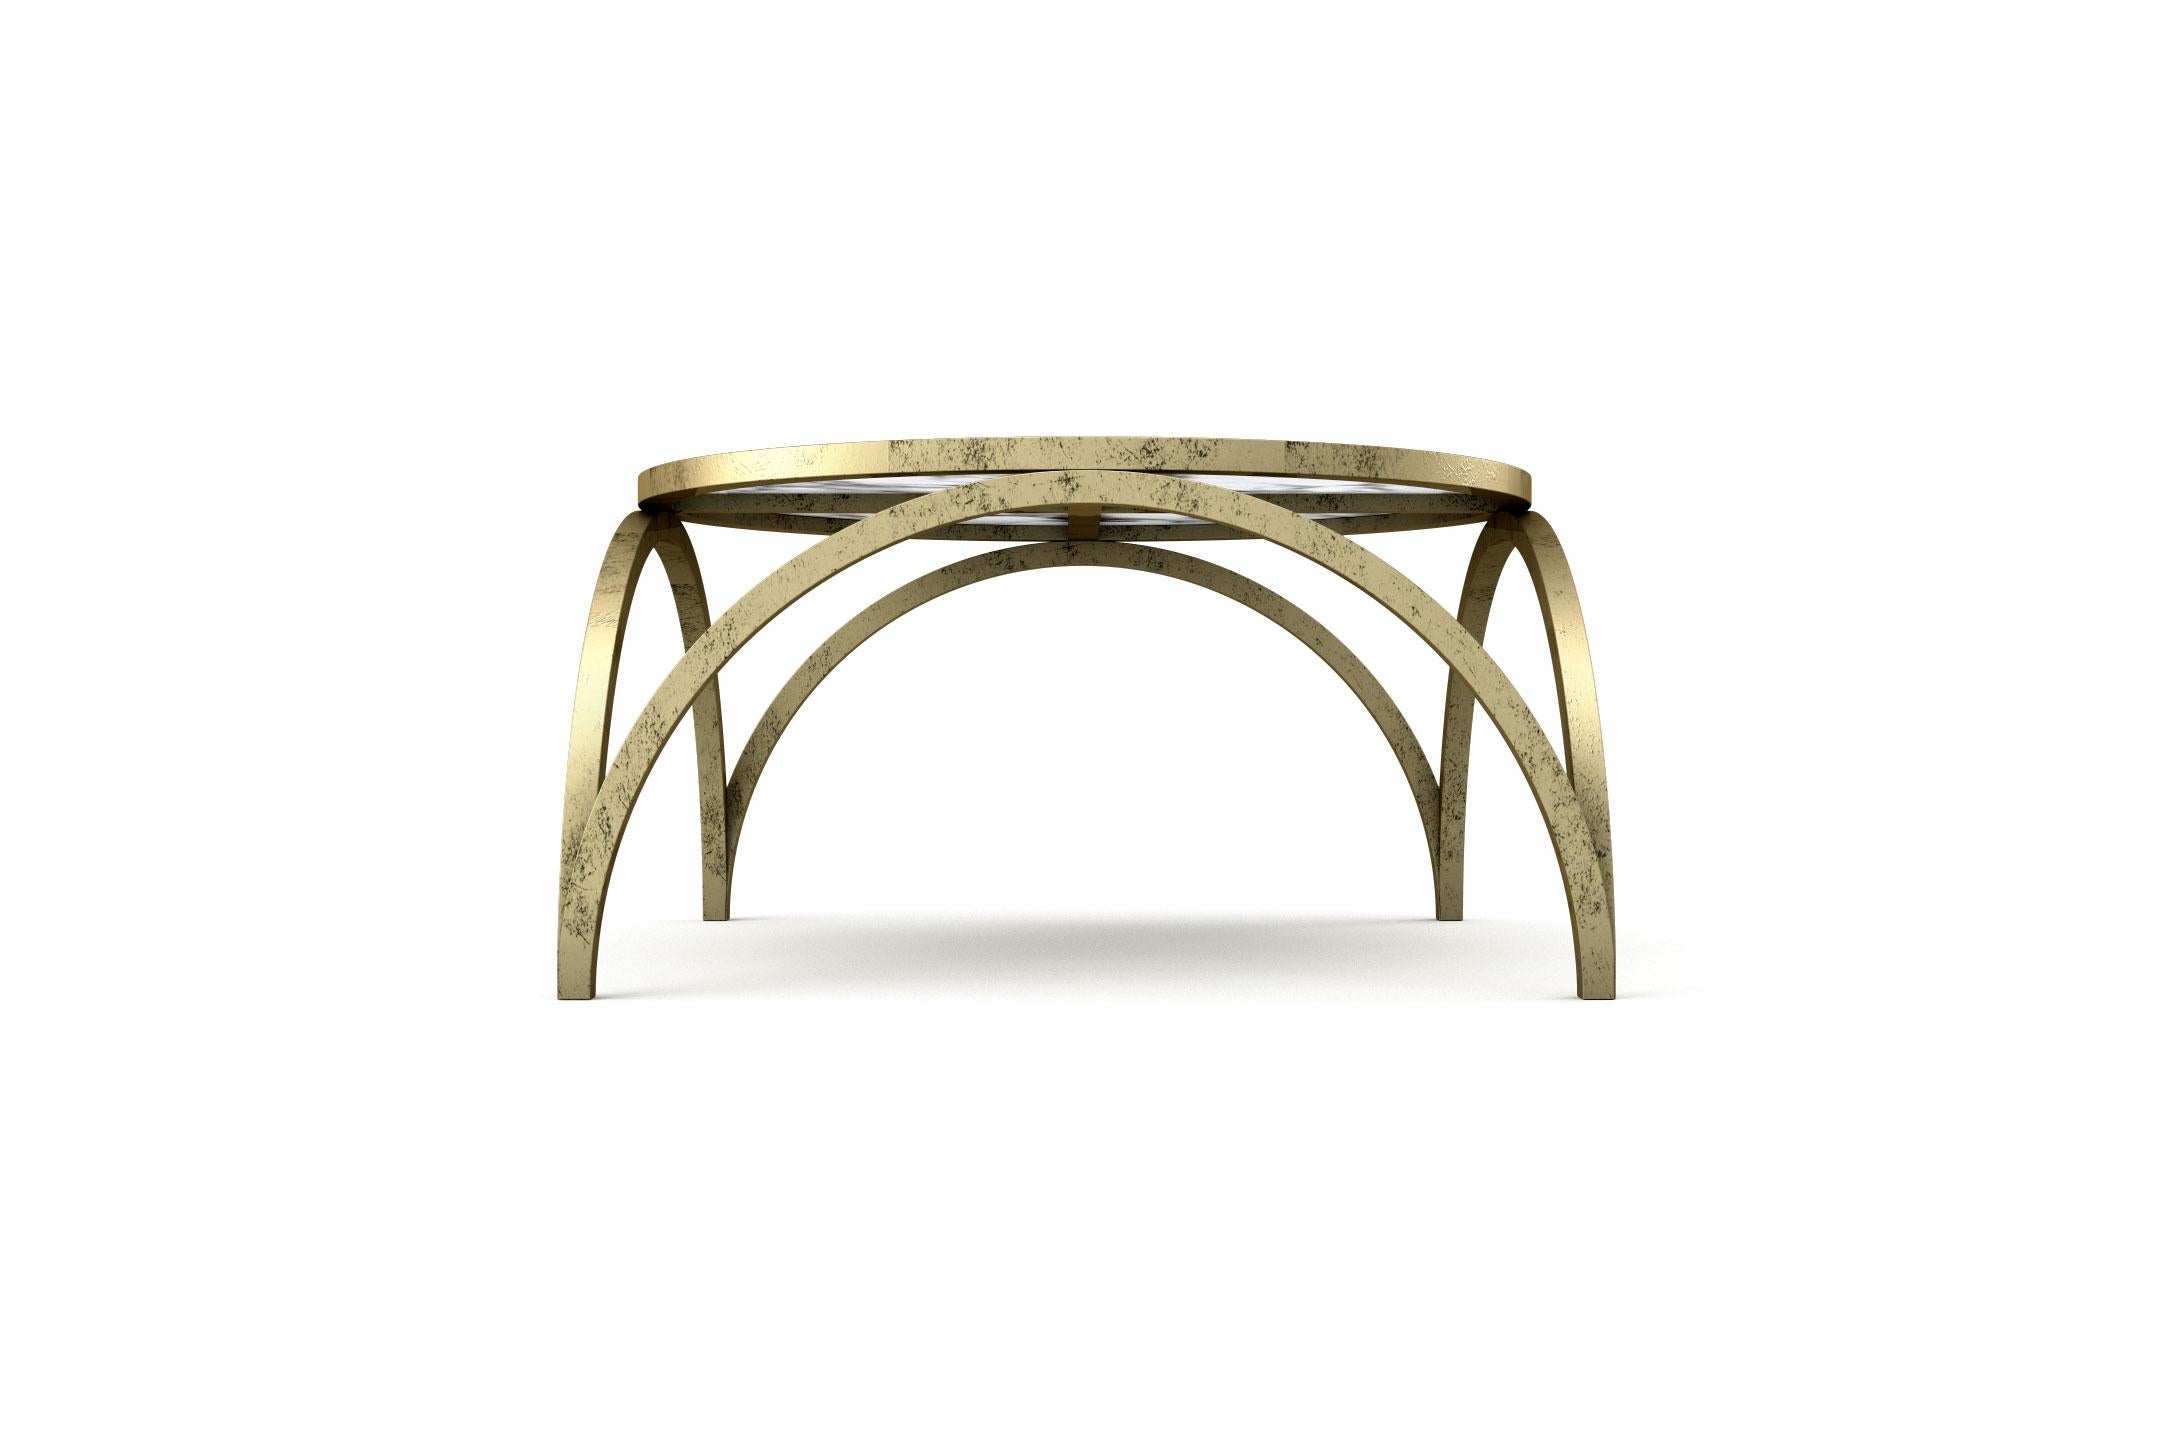 European Crescent Small Coffe Table - Modern Brass Coffee Table For Sale